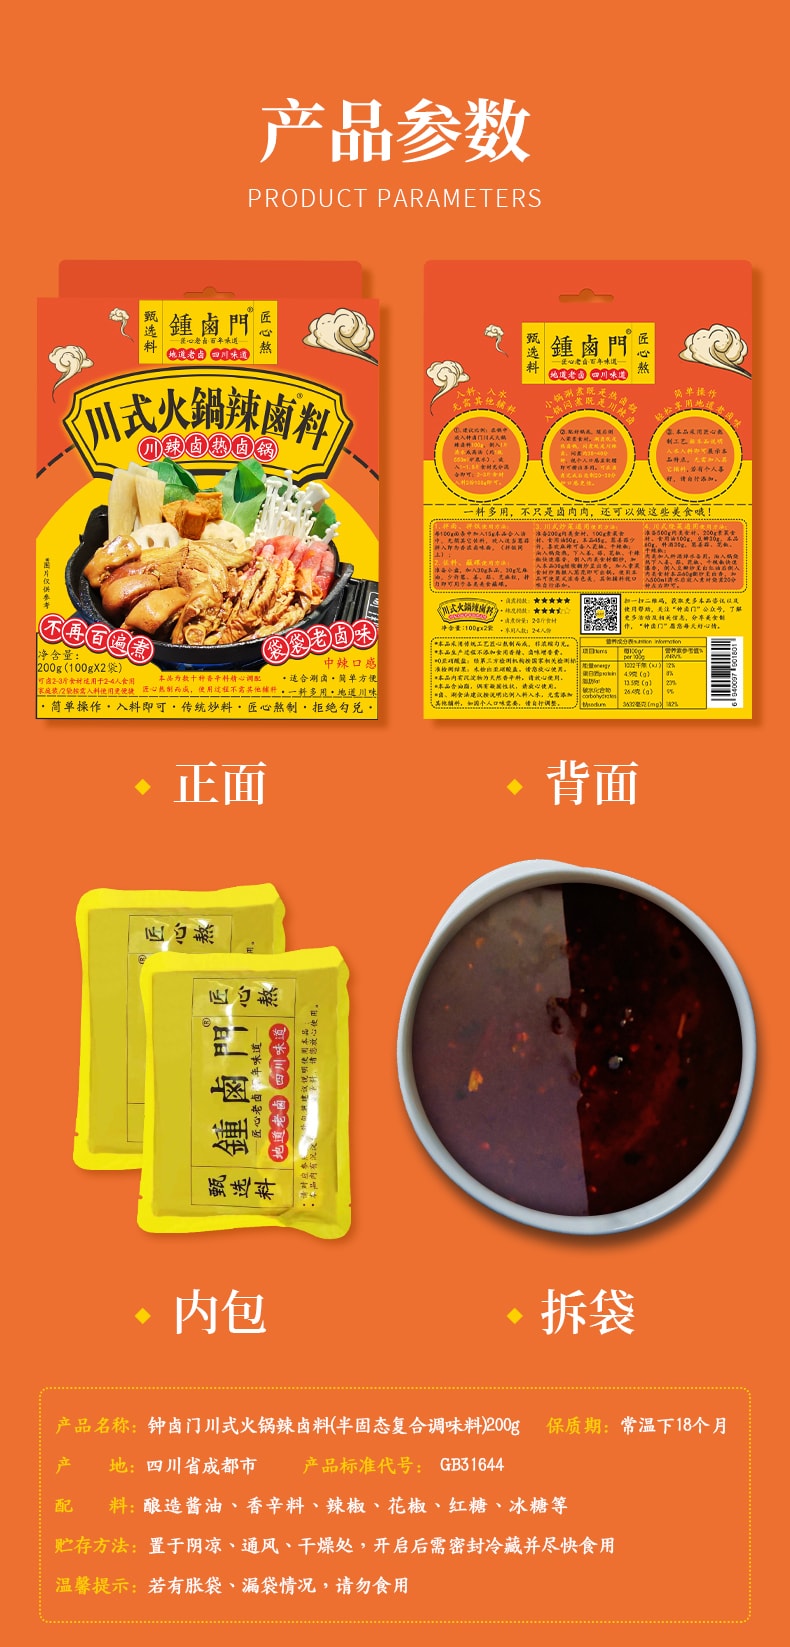 AMAZING SAUCE-Sichuan style hot pot spicy sauce 200g